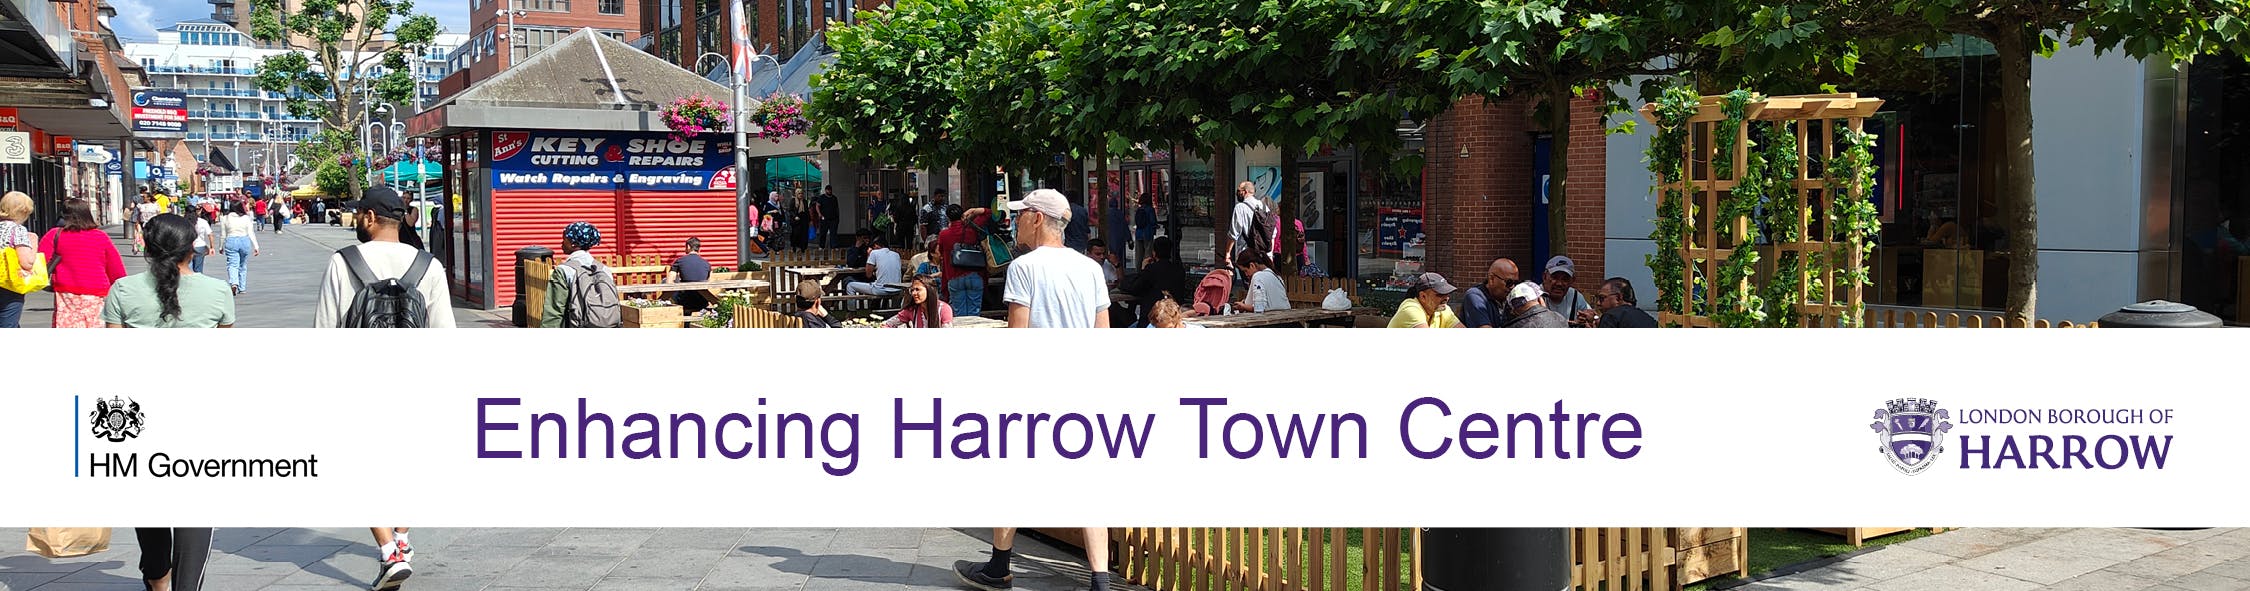 Page banner showing an aerial photograph of Harrow Town Centre, with the text 'Transforming Harrow Town Centre'